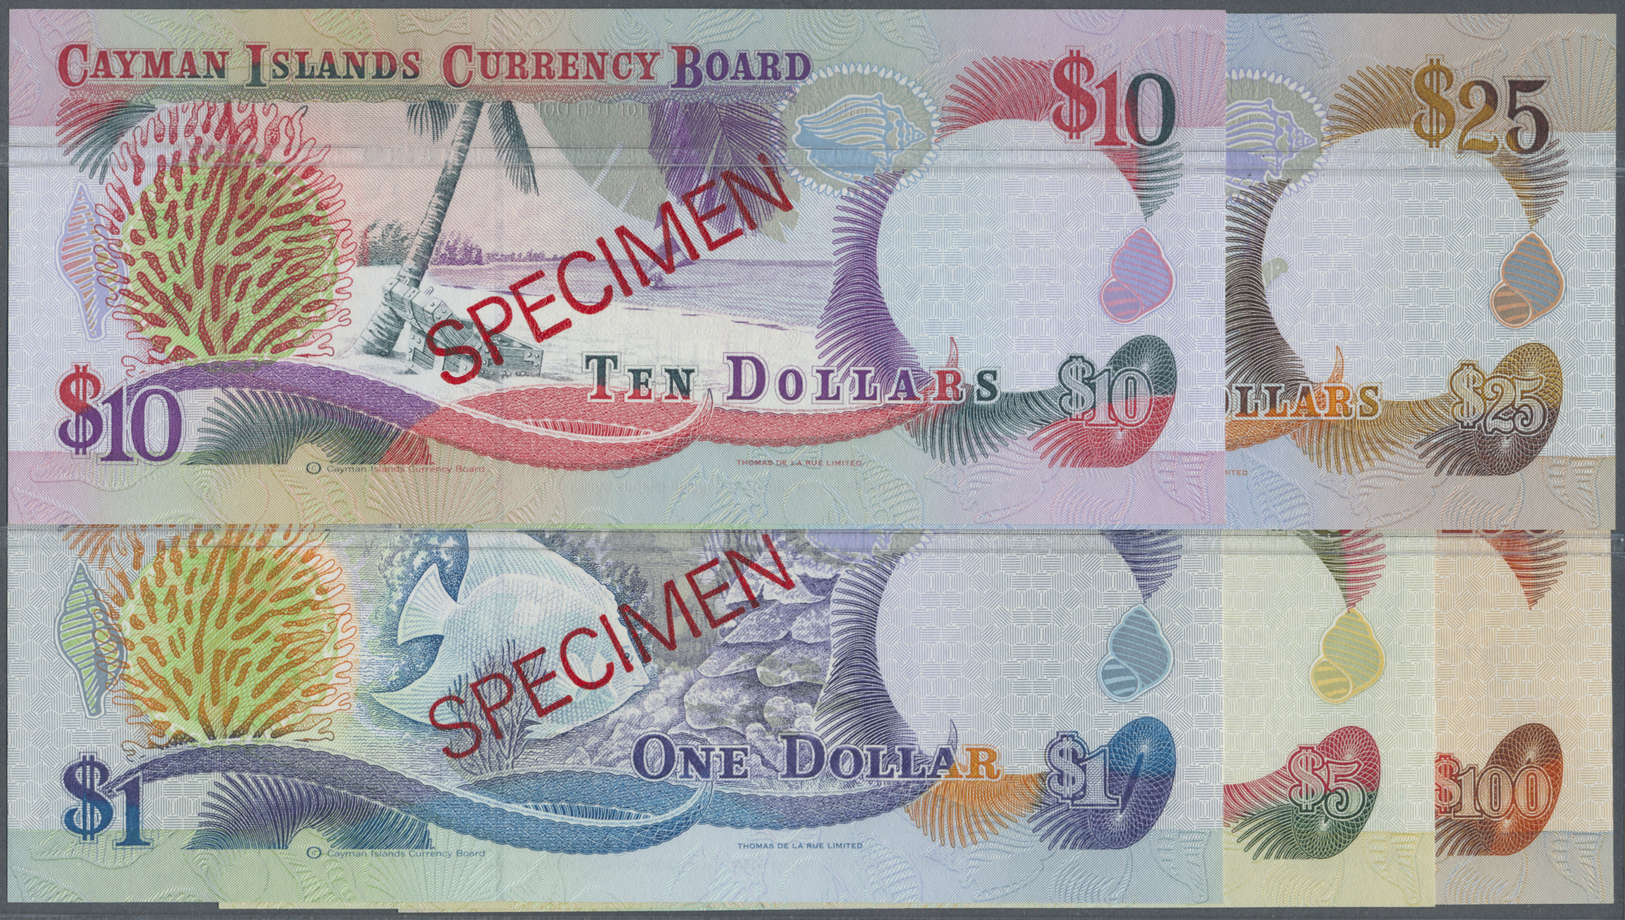 00514 Cayman Islands: Set Of 5 SPECIMEN Notes Containing 1, 5, 10, 25 And 100 Dollars 1996 SPECIMEN P. 16s-20s, All In C - Cayman Islands